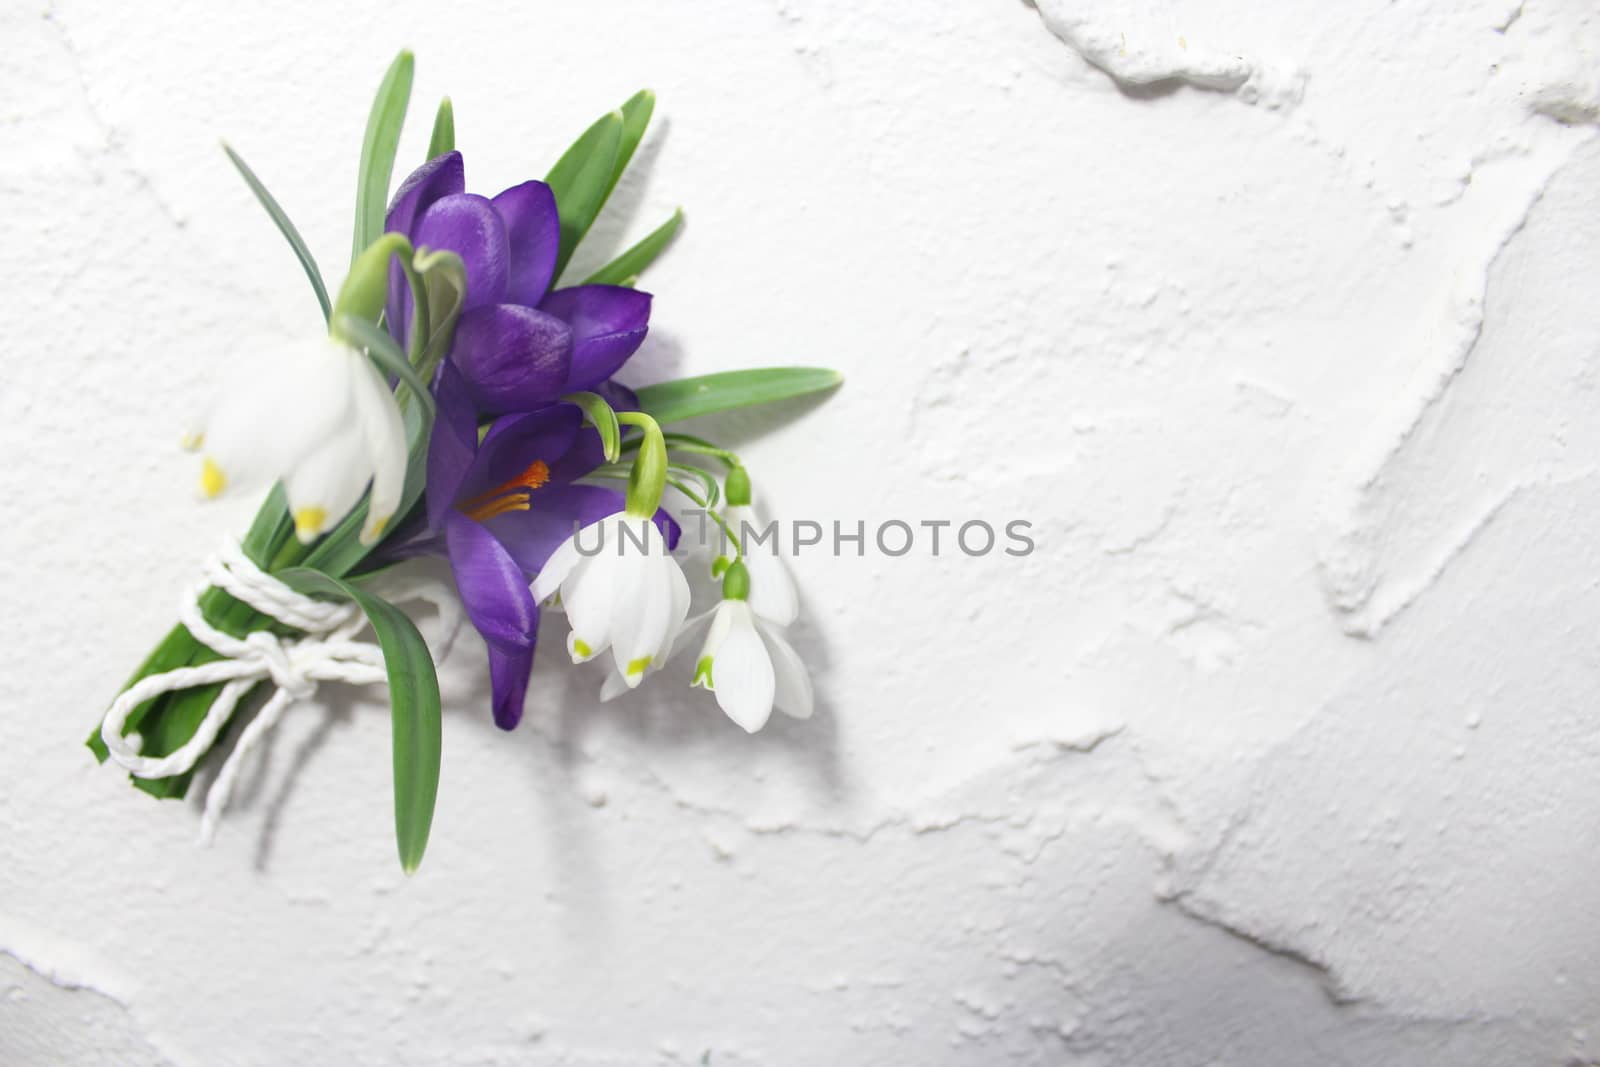 different early flowering plants on the wall by martina_unbehauen